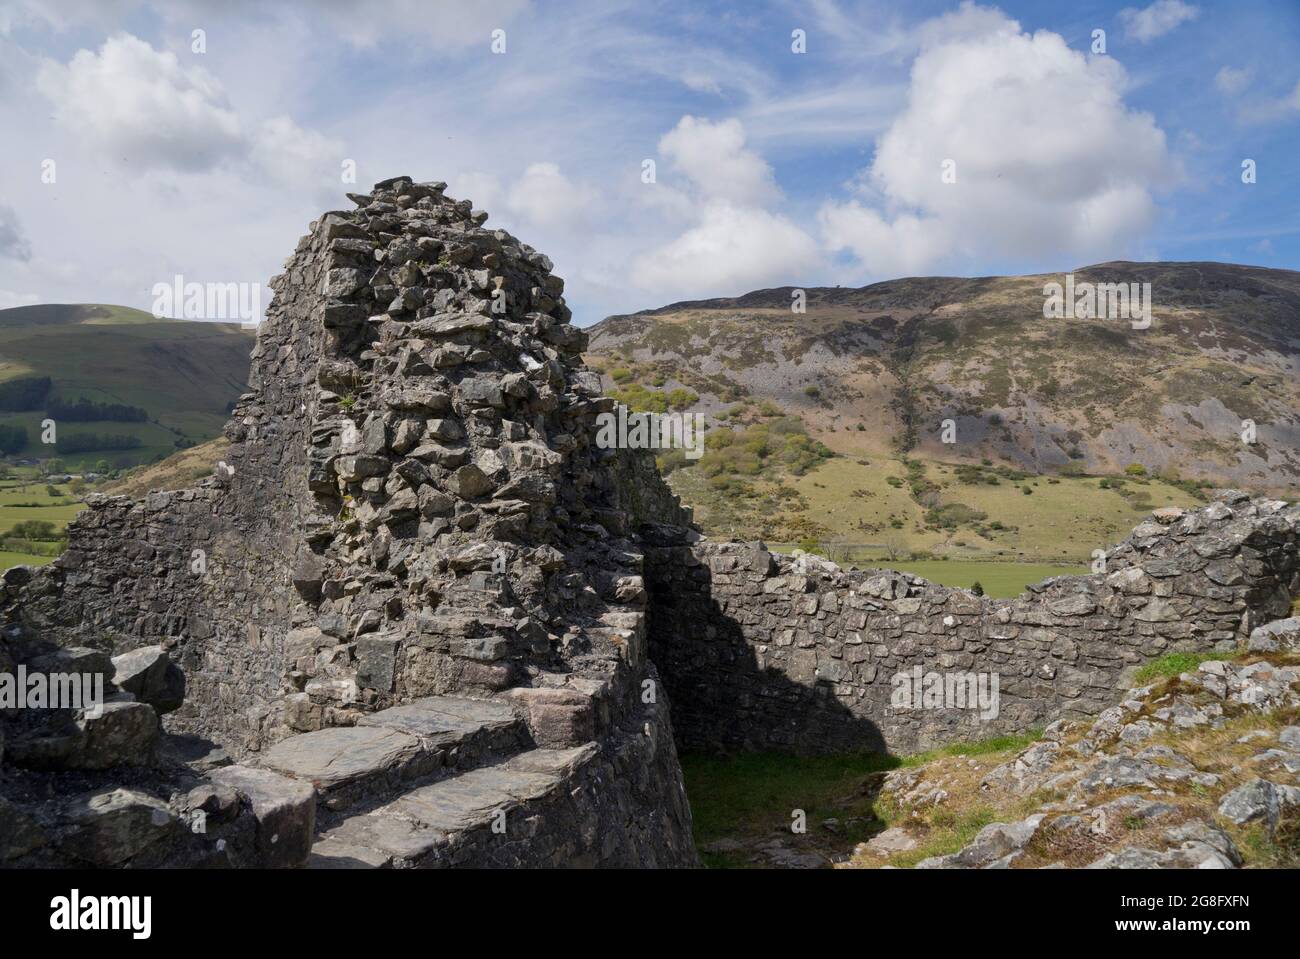 Castell y Bere, a Welsh castle constructed by Llywelyn the Great in the 1220s, Gwynedd, Wales, United Kingdom, Europe Stock Photo